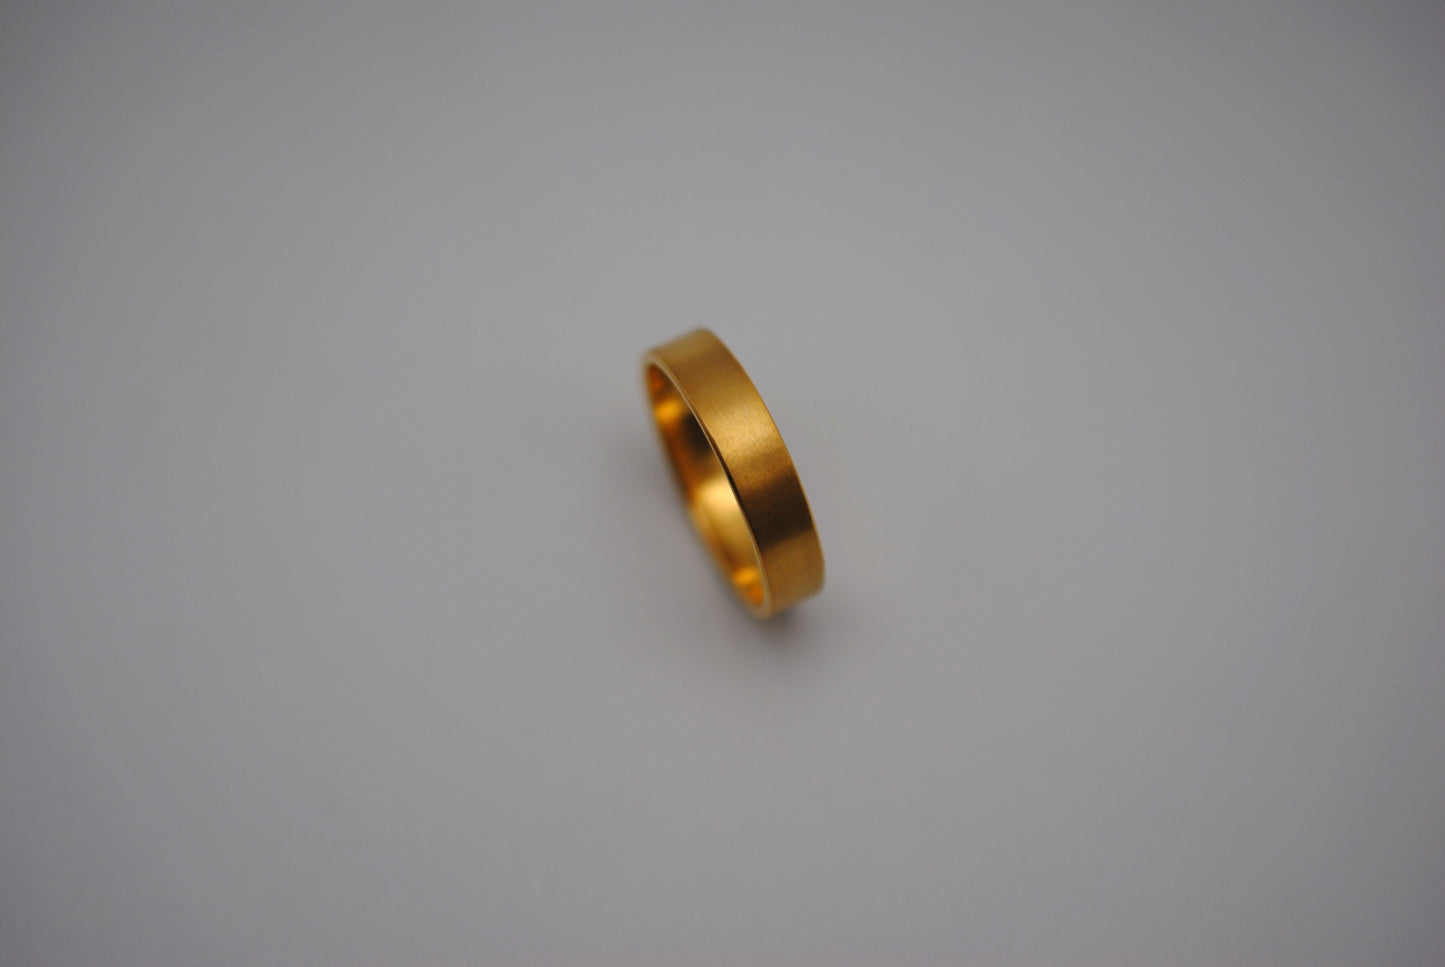 Ring Band: Brushed Texture, Yellow Gold Finish, 5mm Wide